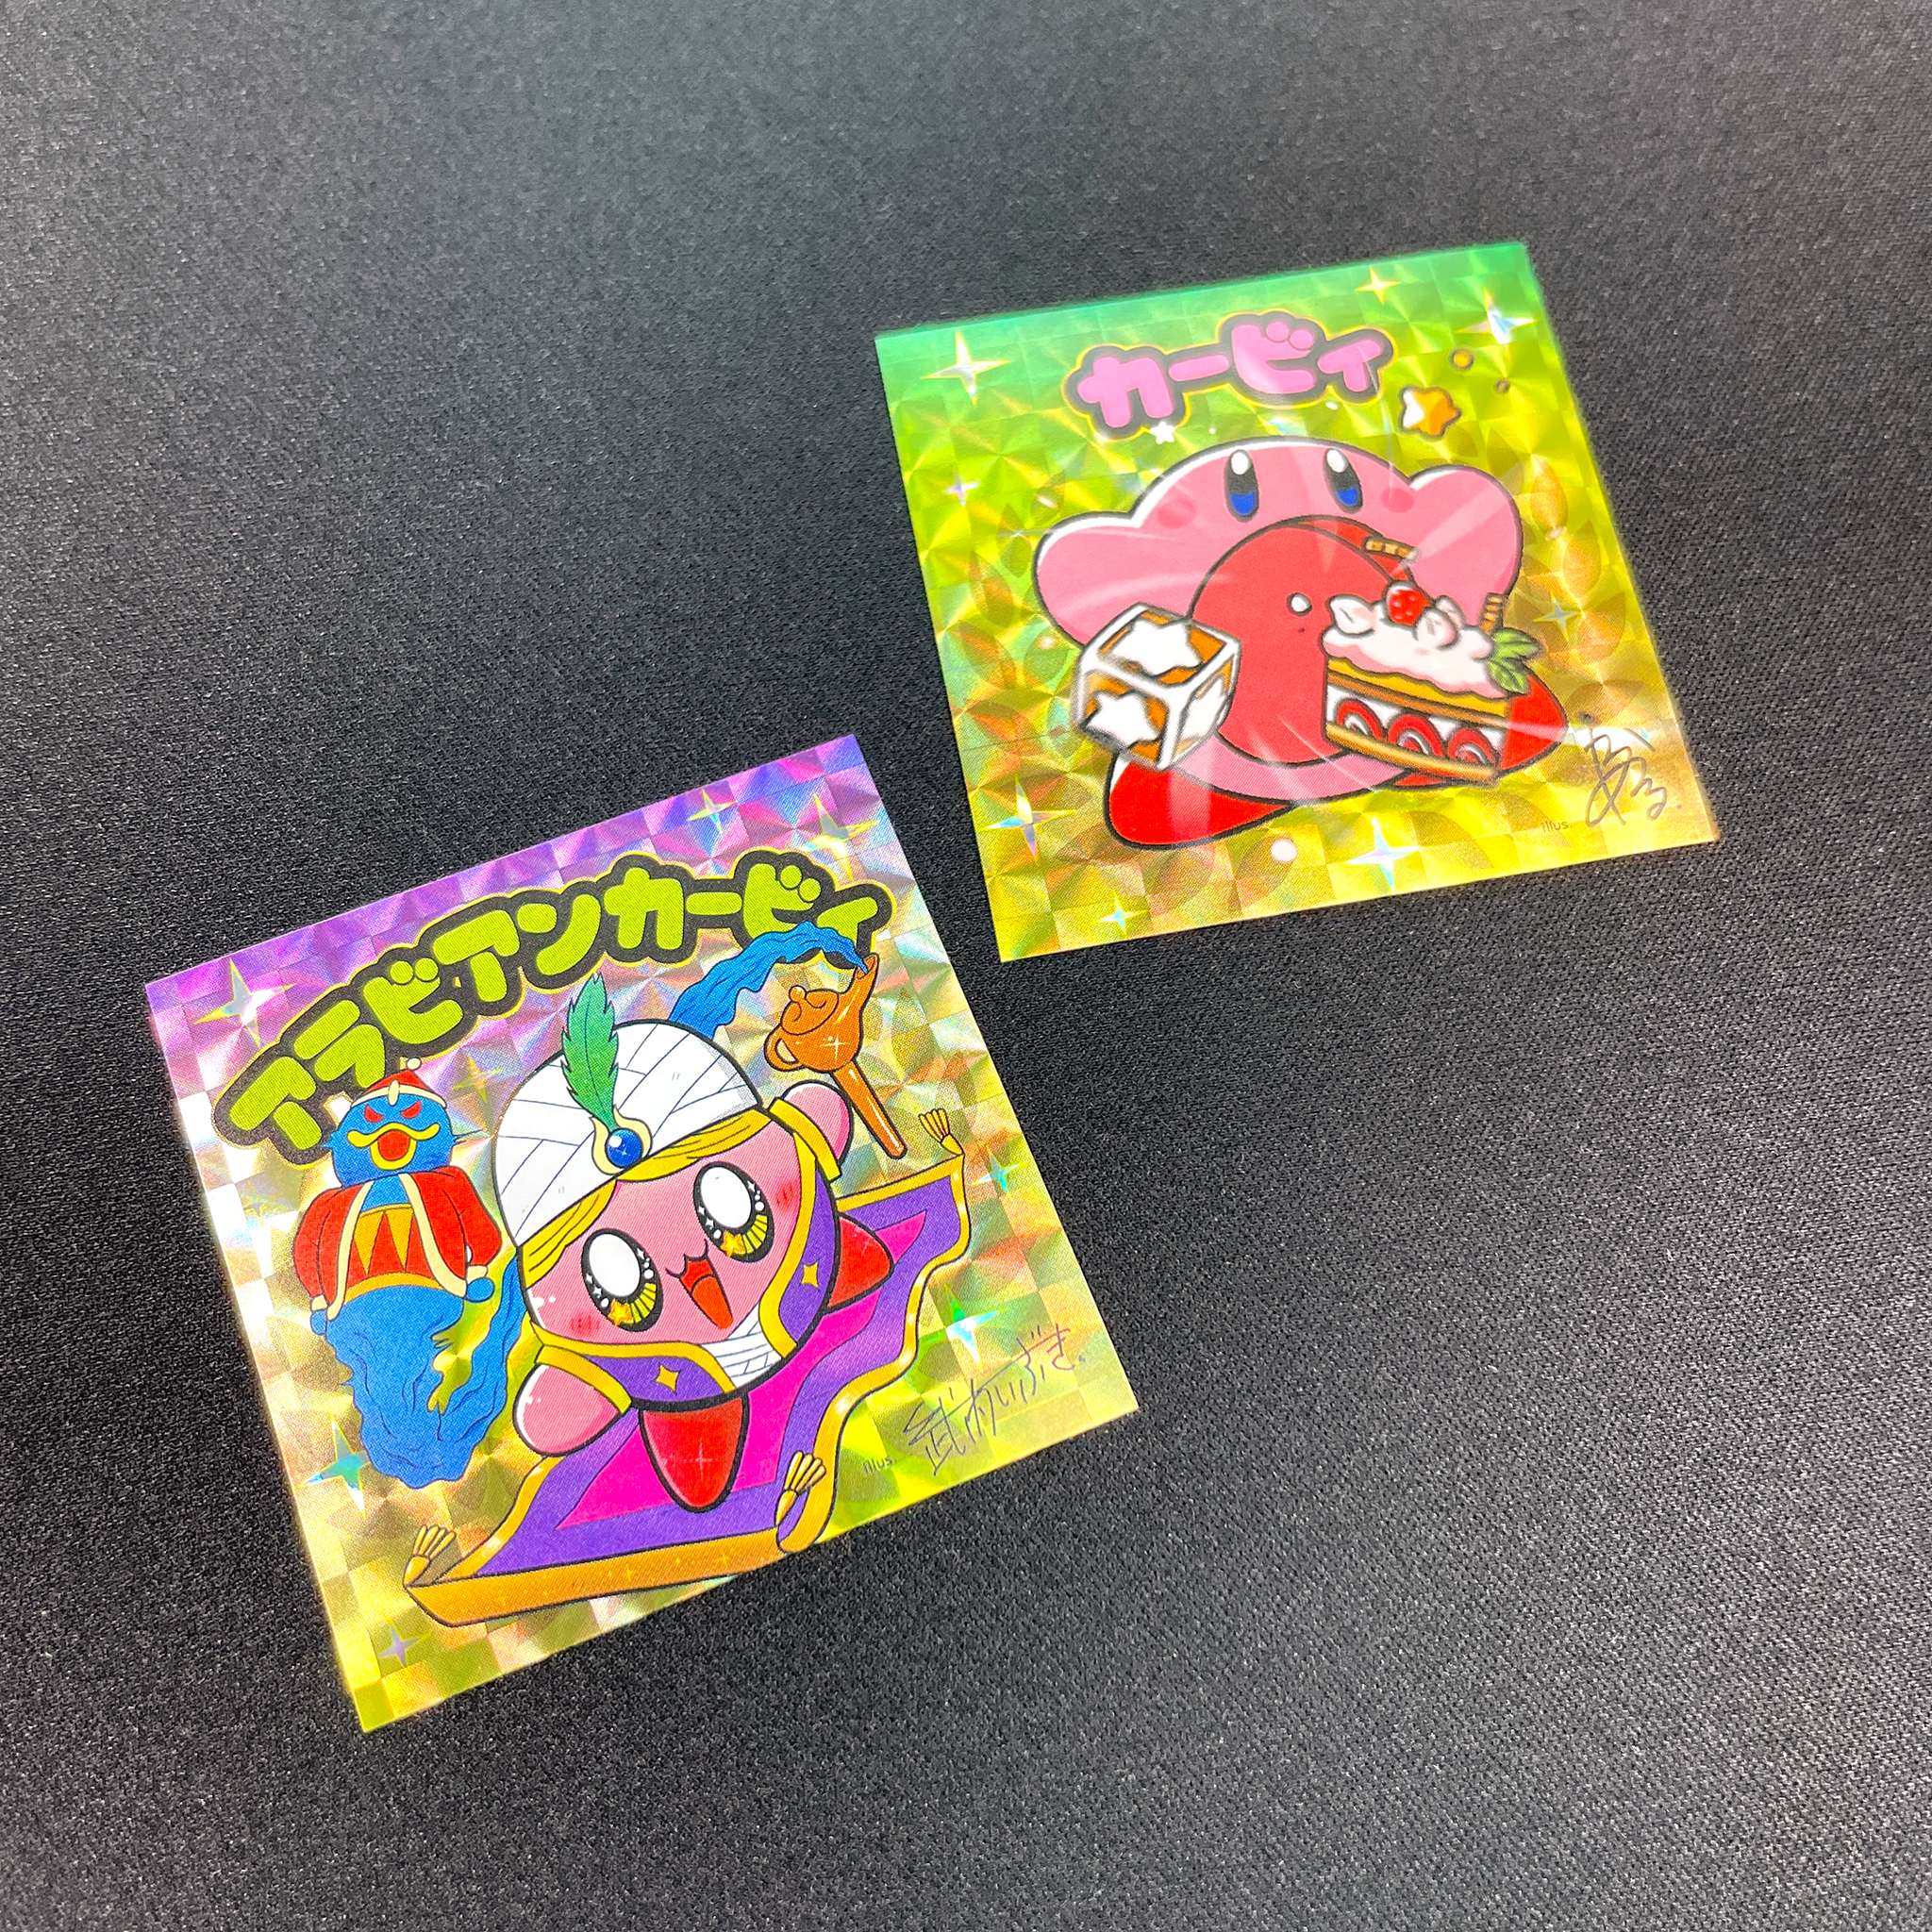 Hoshi no Kirby CoroCoro Limited Collection Sticker